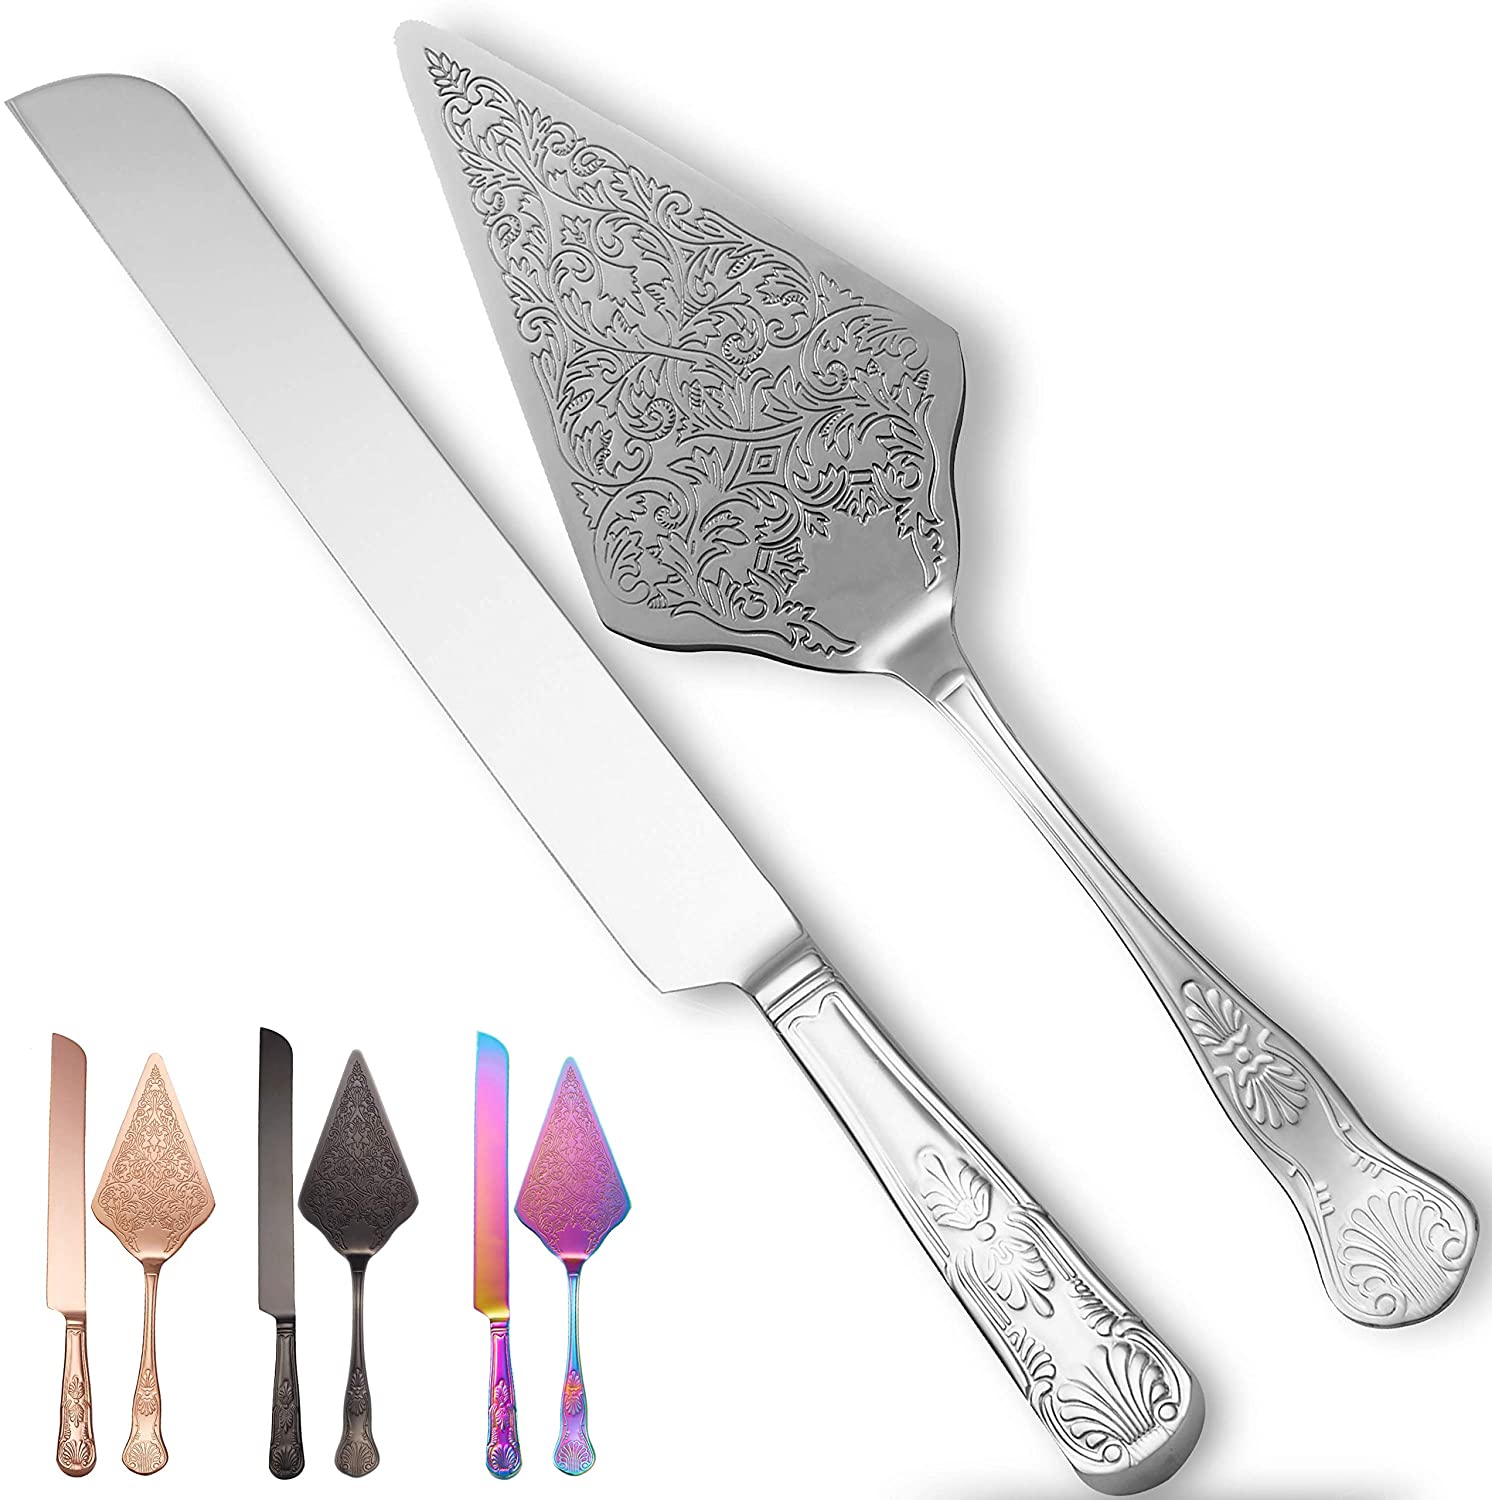 Rustic Wedding Cake Knife And Server Set Stainless Steel Cake